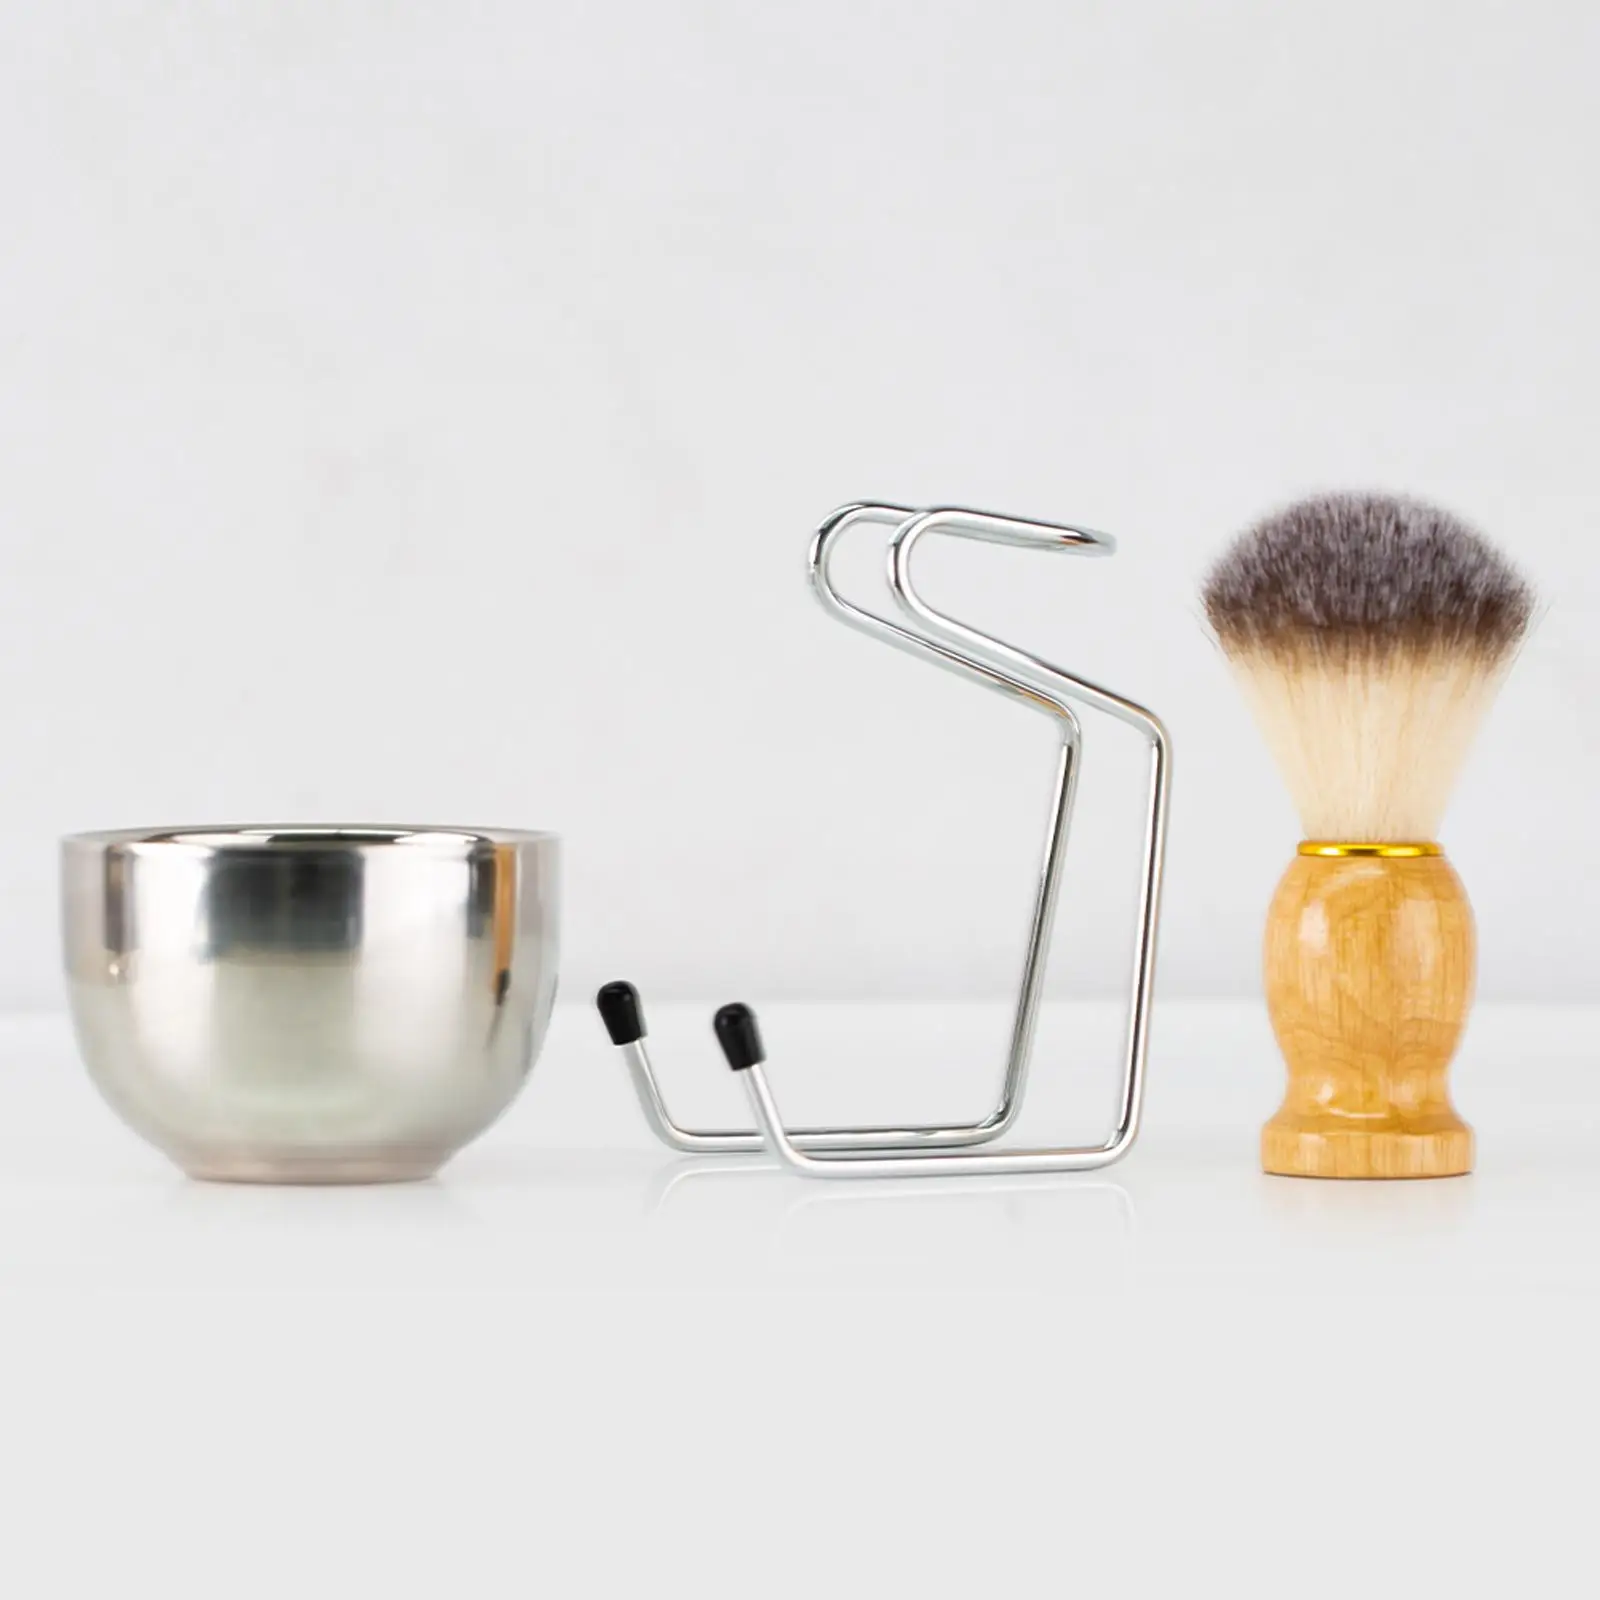 Stainless Steel Shaving Stand with Bowl and Brush, Easy Carry Fashion Design Dia 82mm Bowl